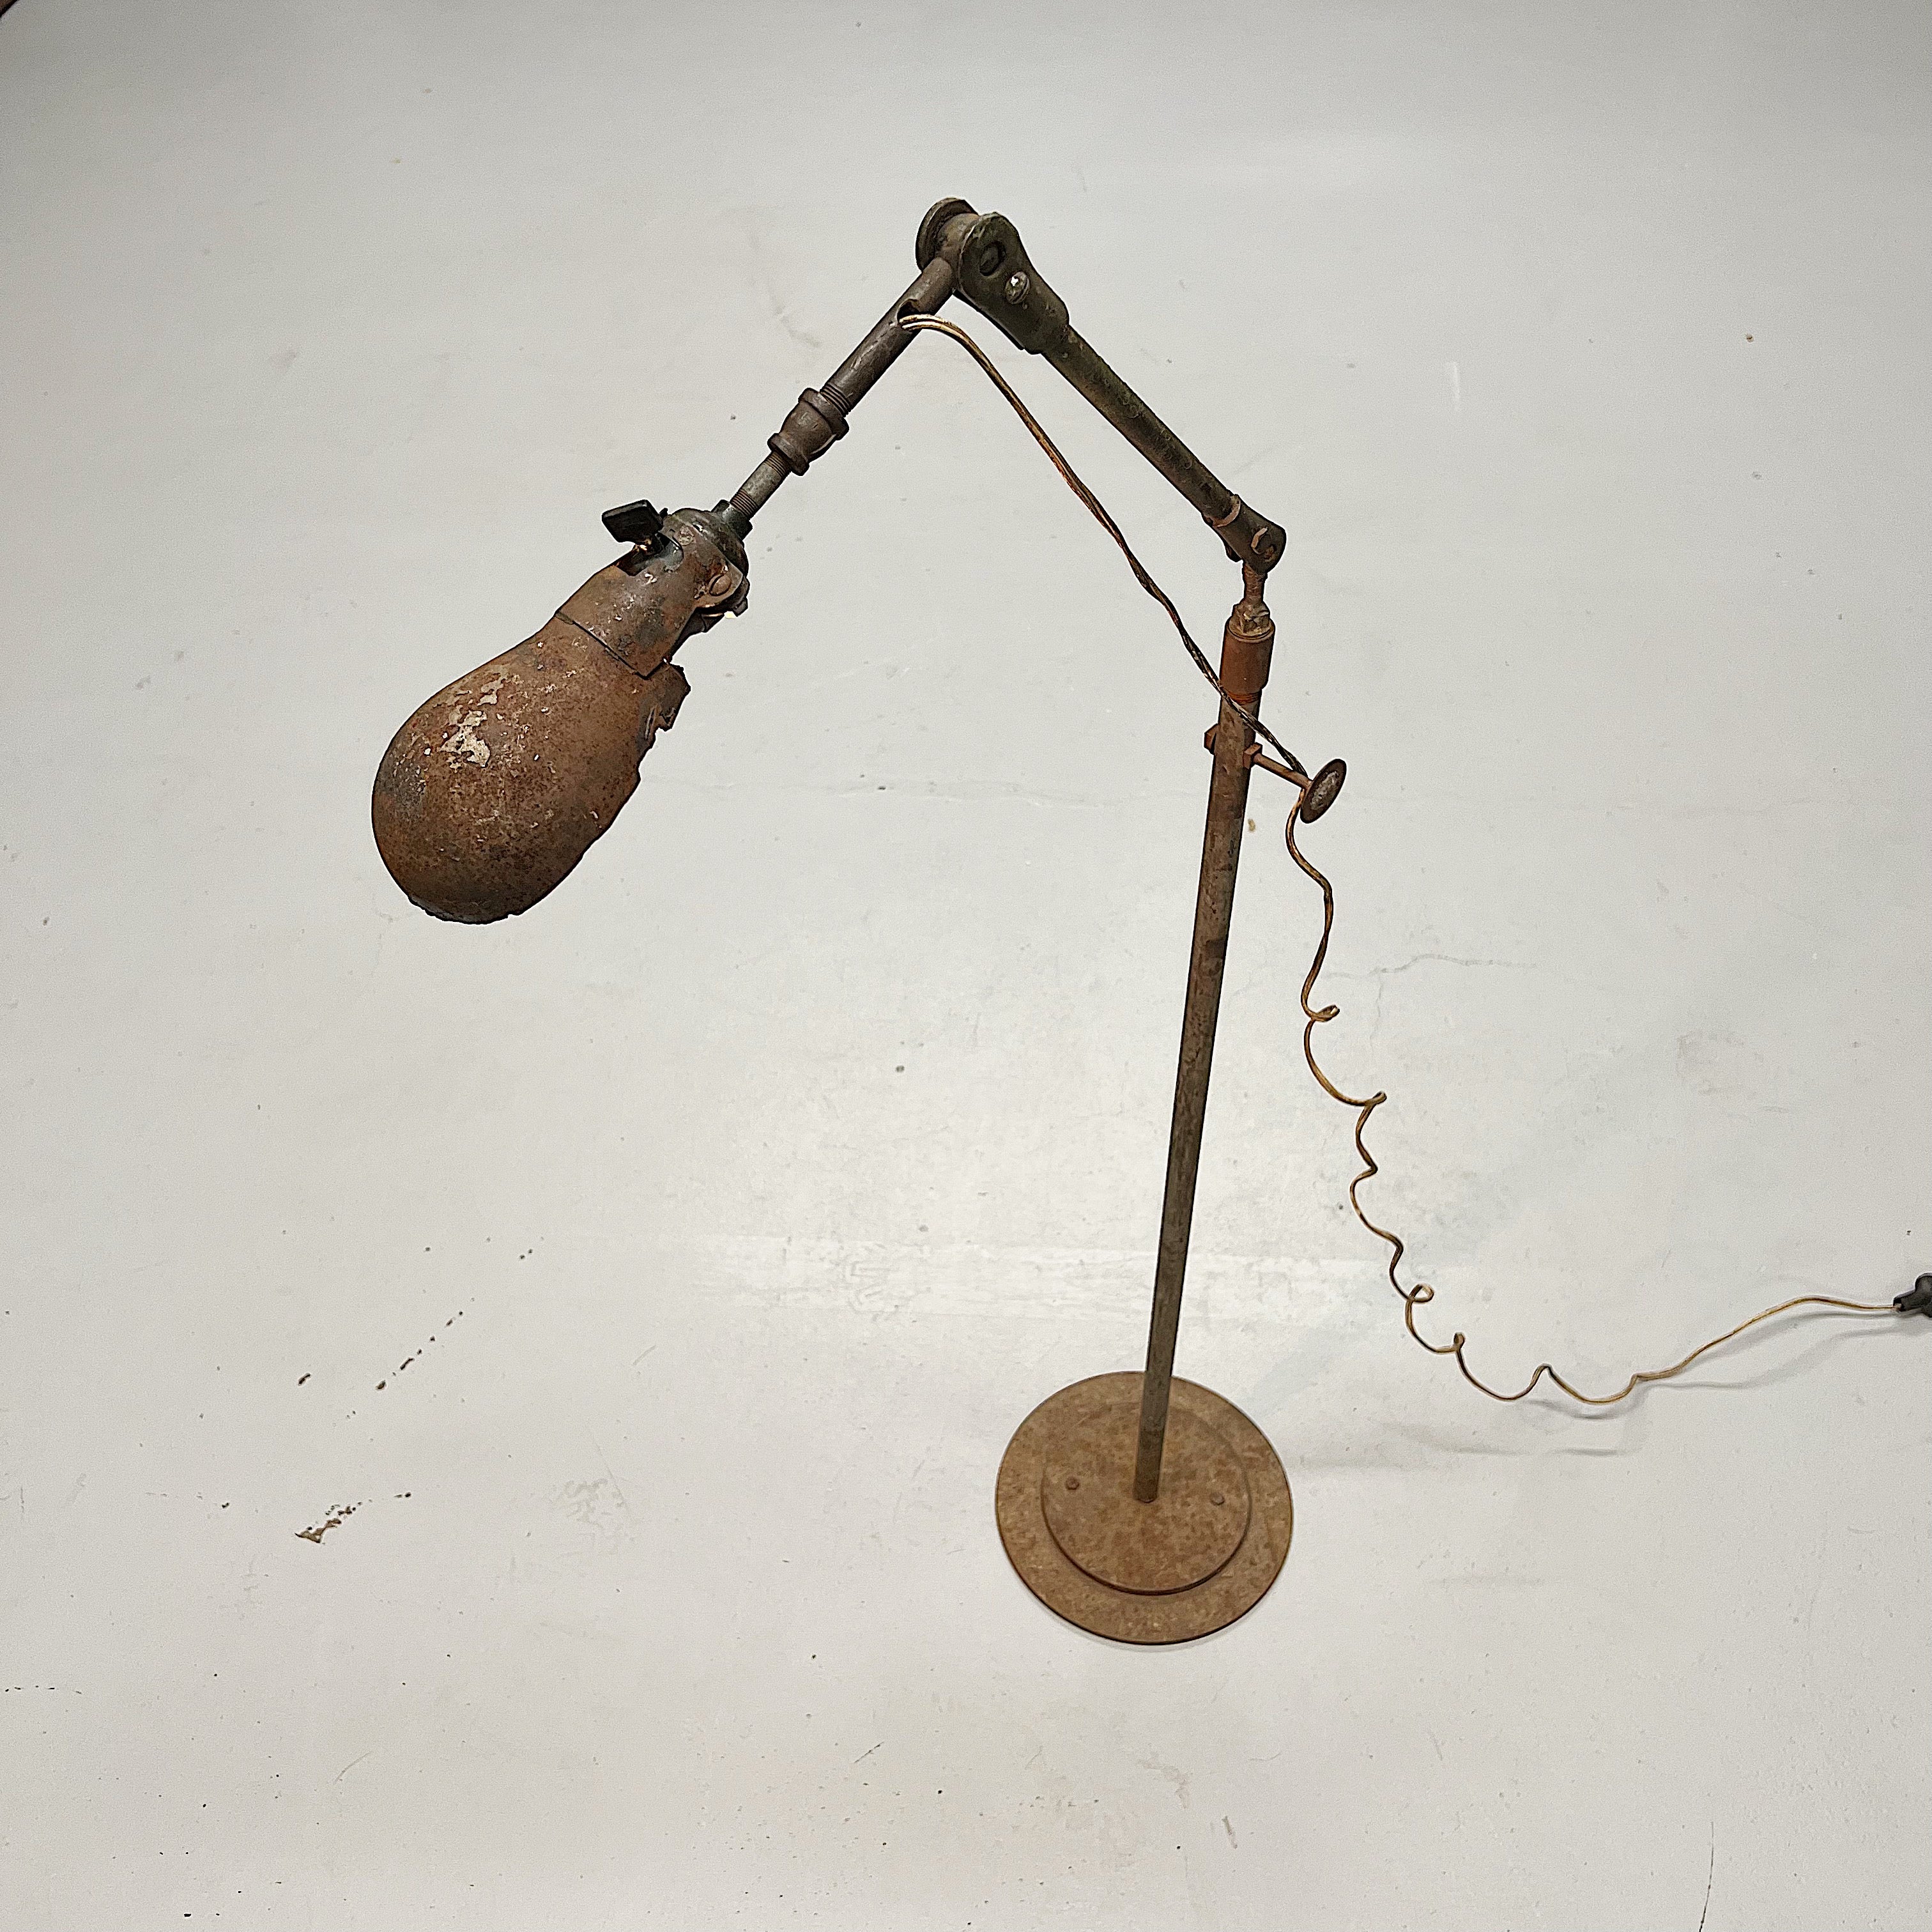 Vintage Industrial Articulating Floor Lamp from Machinist Shop Rare Decor 1940s